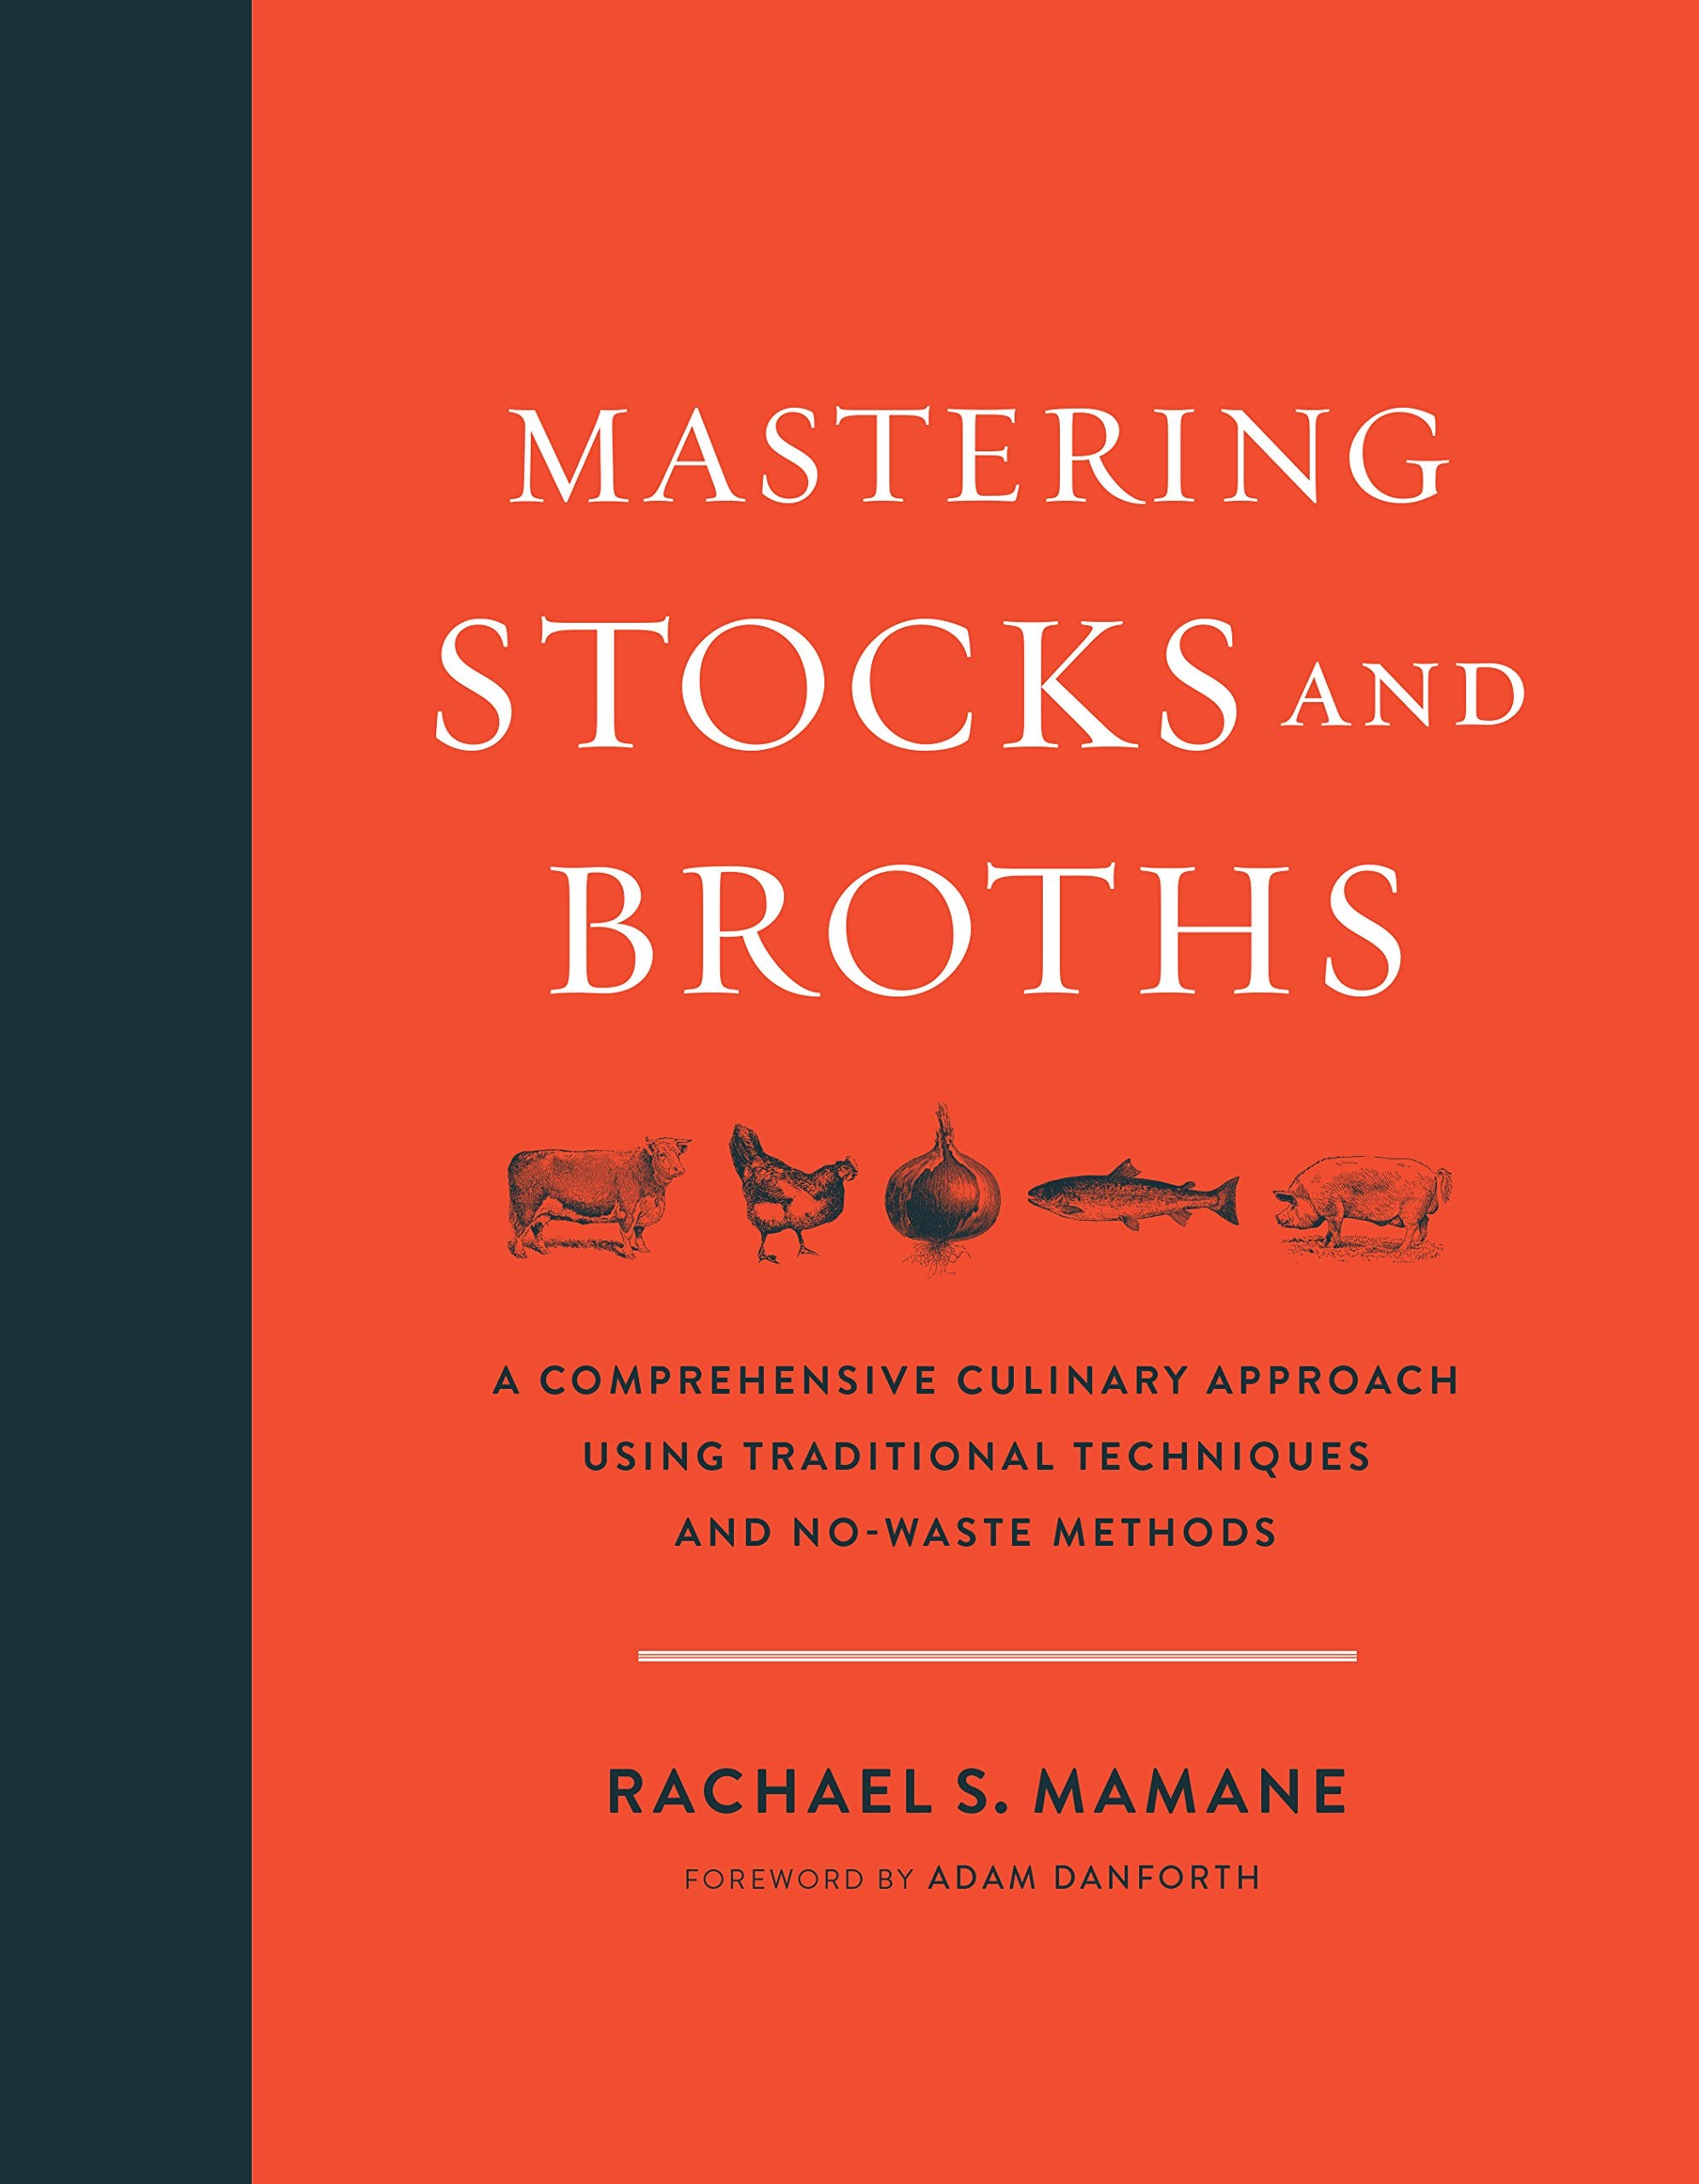 Mastering Stocks and Broths: A Comprehensive Culinary Approach Using Traditional Techniques and No-Waste Methods (Rachael Mamane)